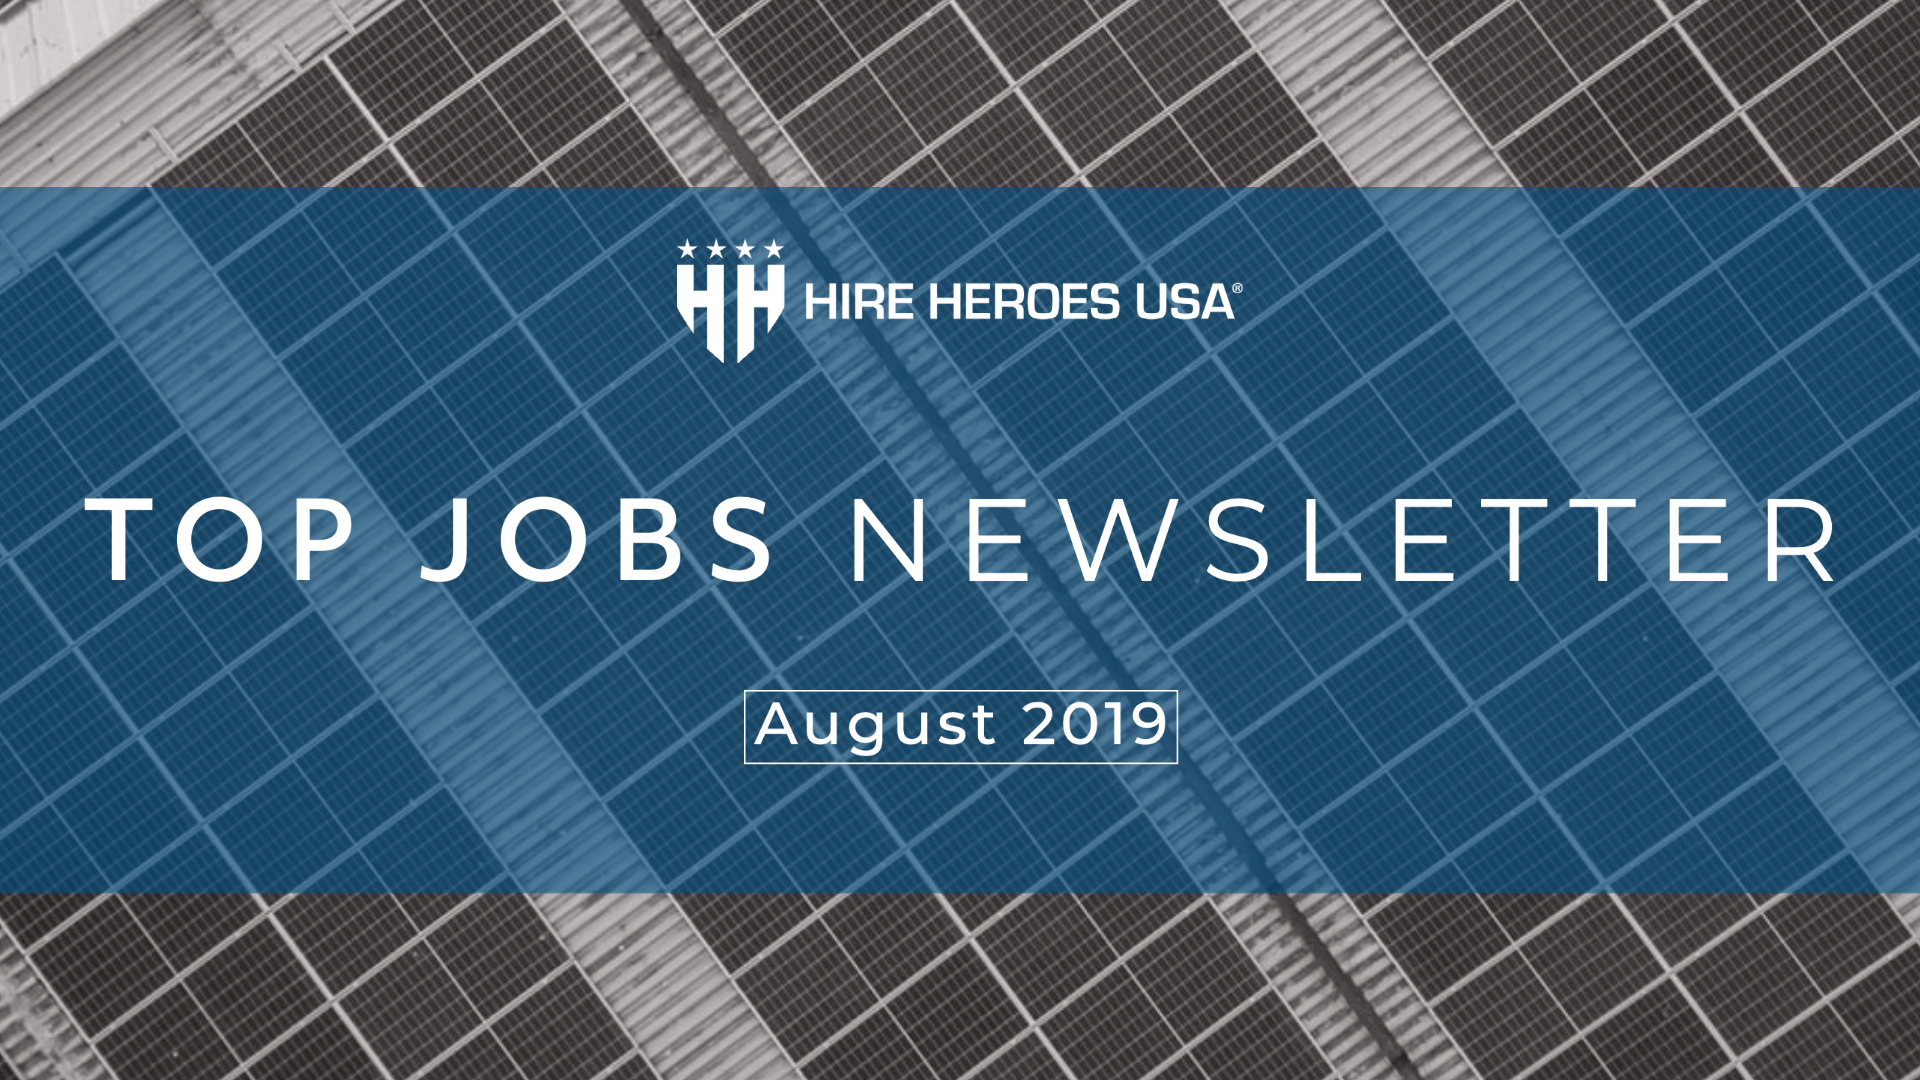 Top Jobs for the Month of August 2019